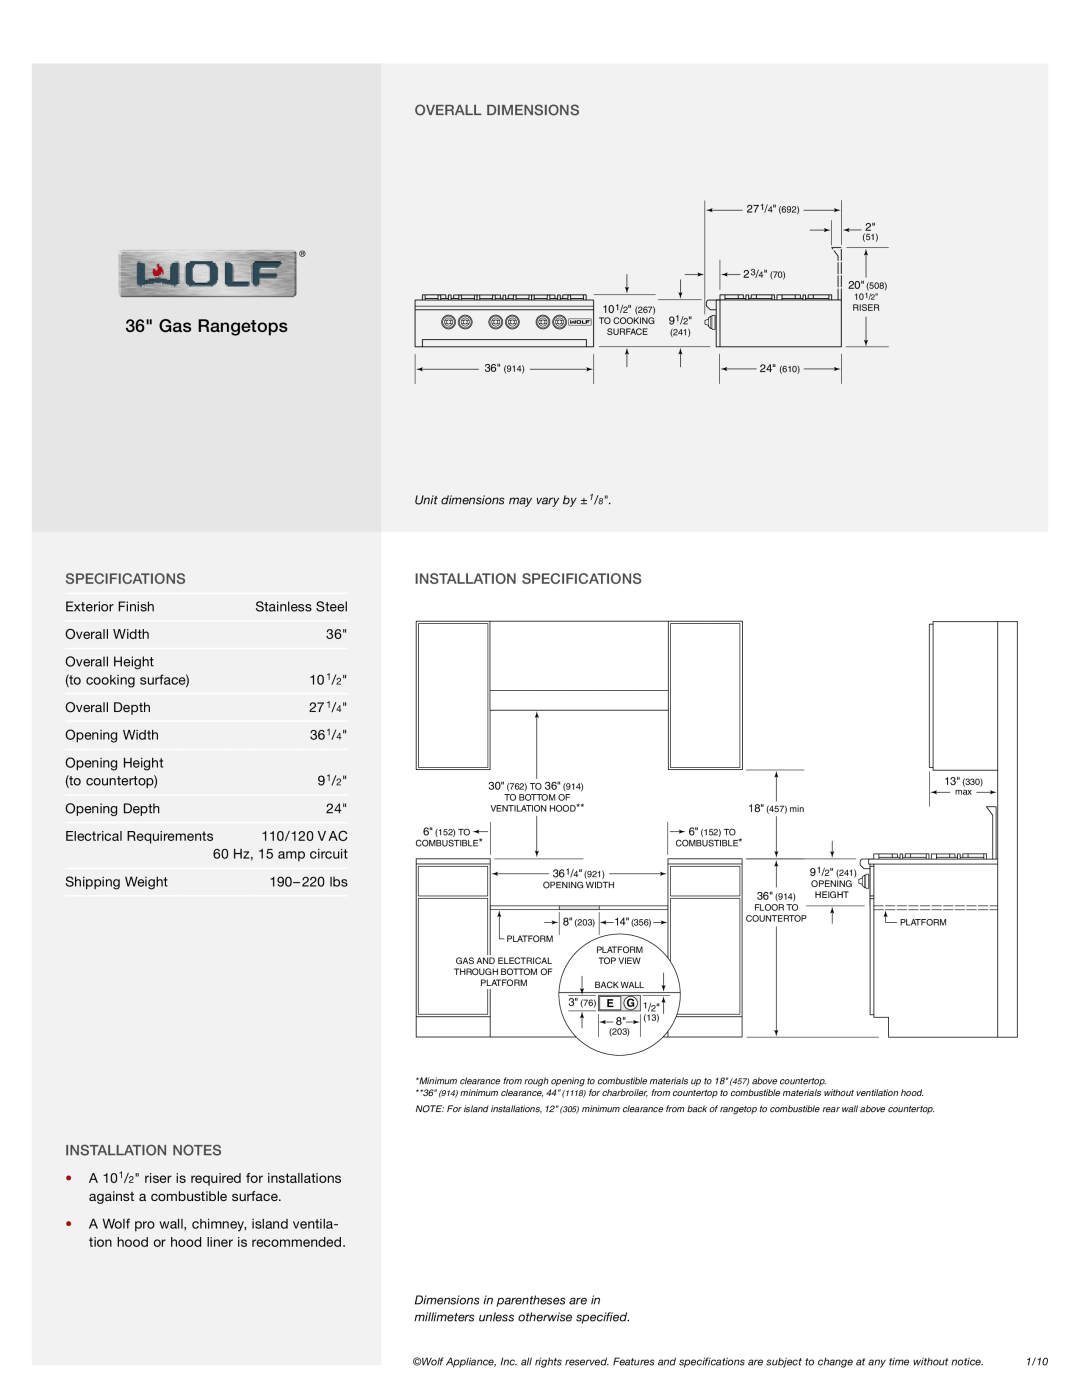 Wolf RT364C, RT366, RT364G manual Overall Dimensions, Installation Specifications, Installation Notes, Gas Rangetops 